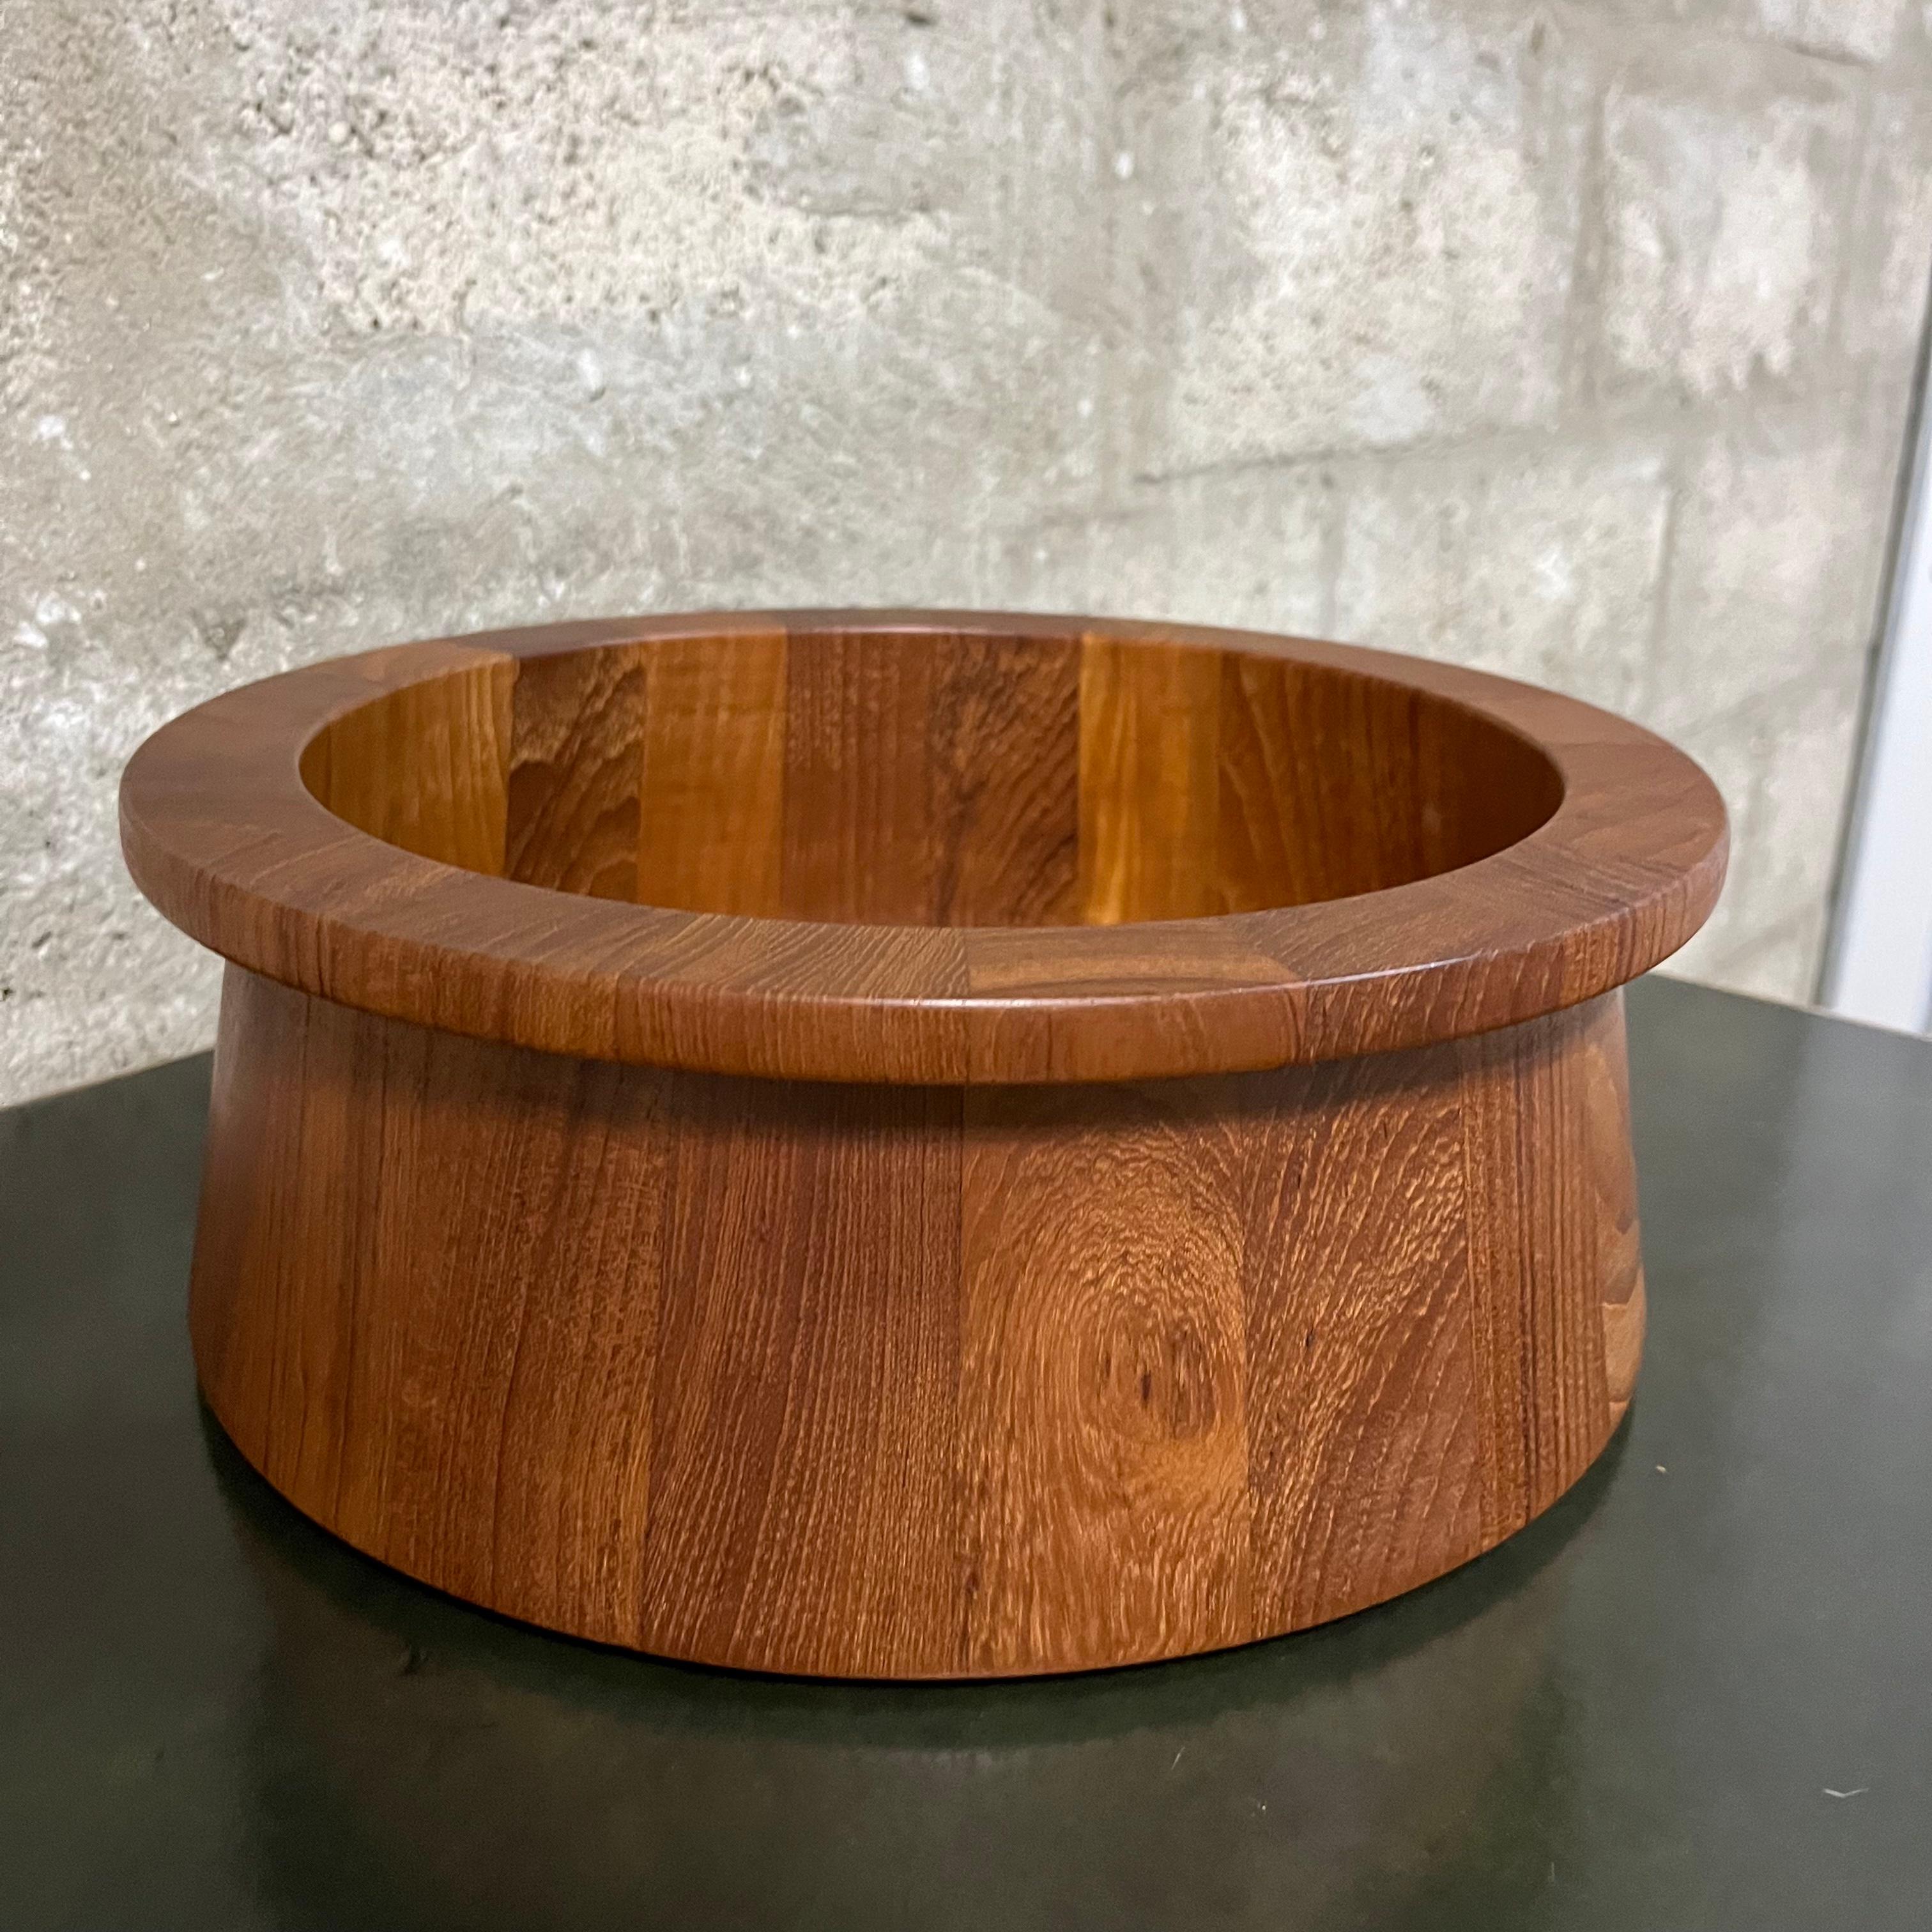 Mid Century Danish Modern Serving Bowl by Jens Quistgaard for Dansk. C 1970s In Good Condition For Sale In Miami, FL